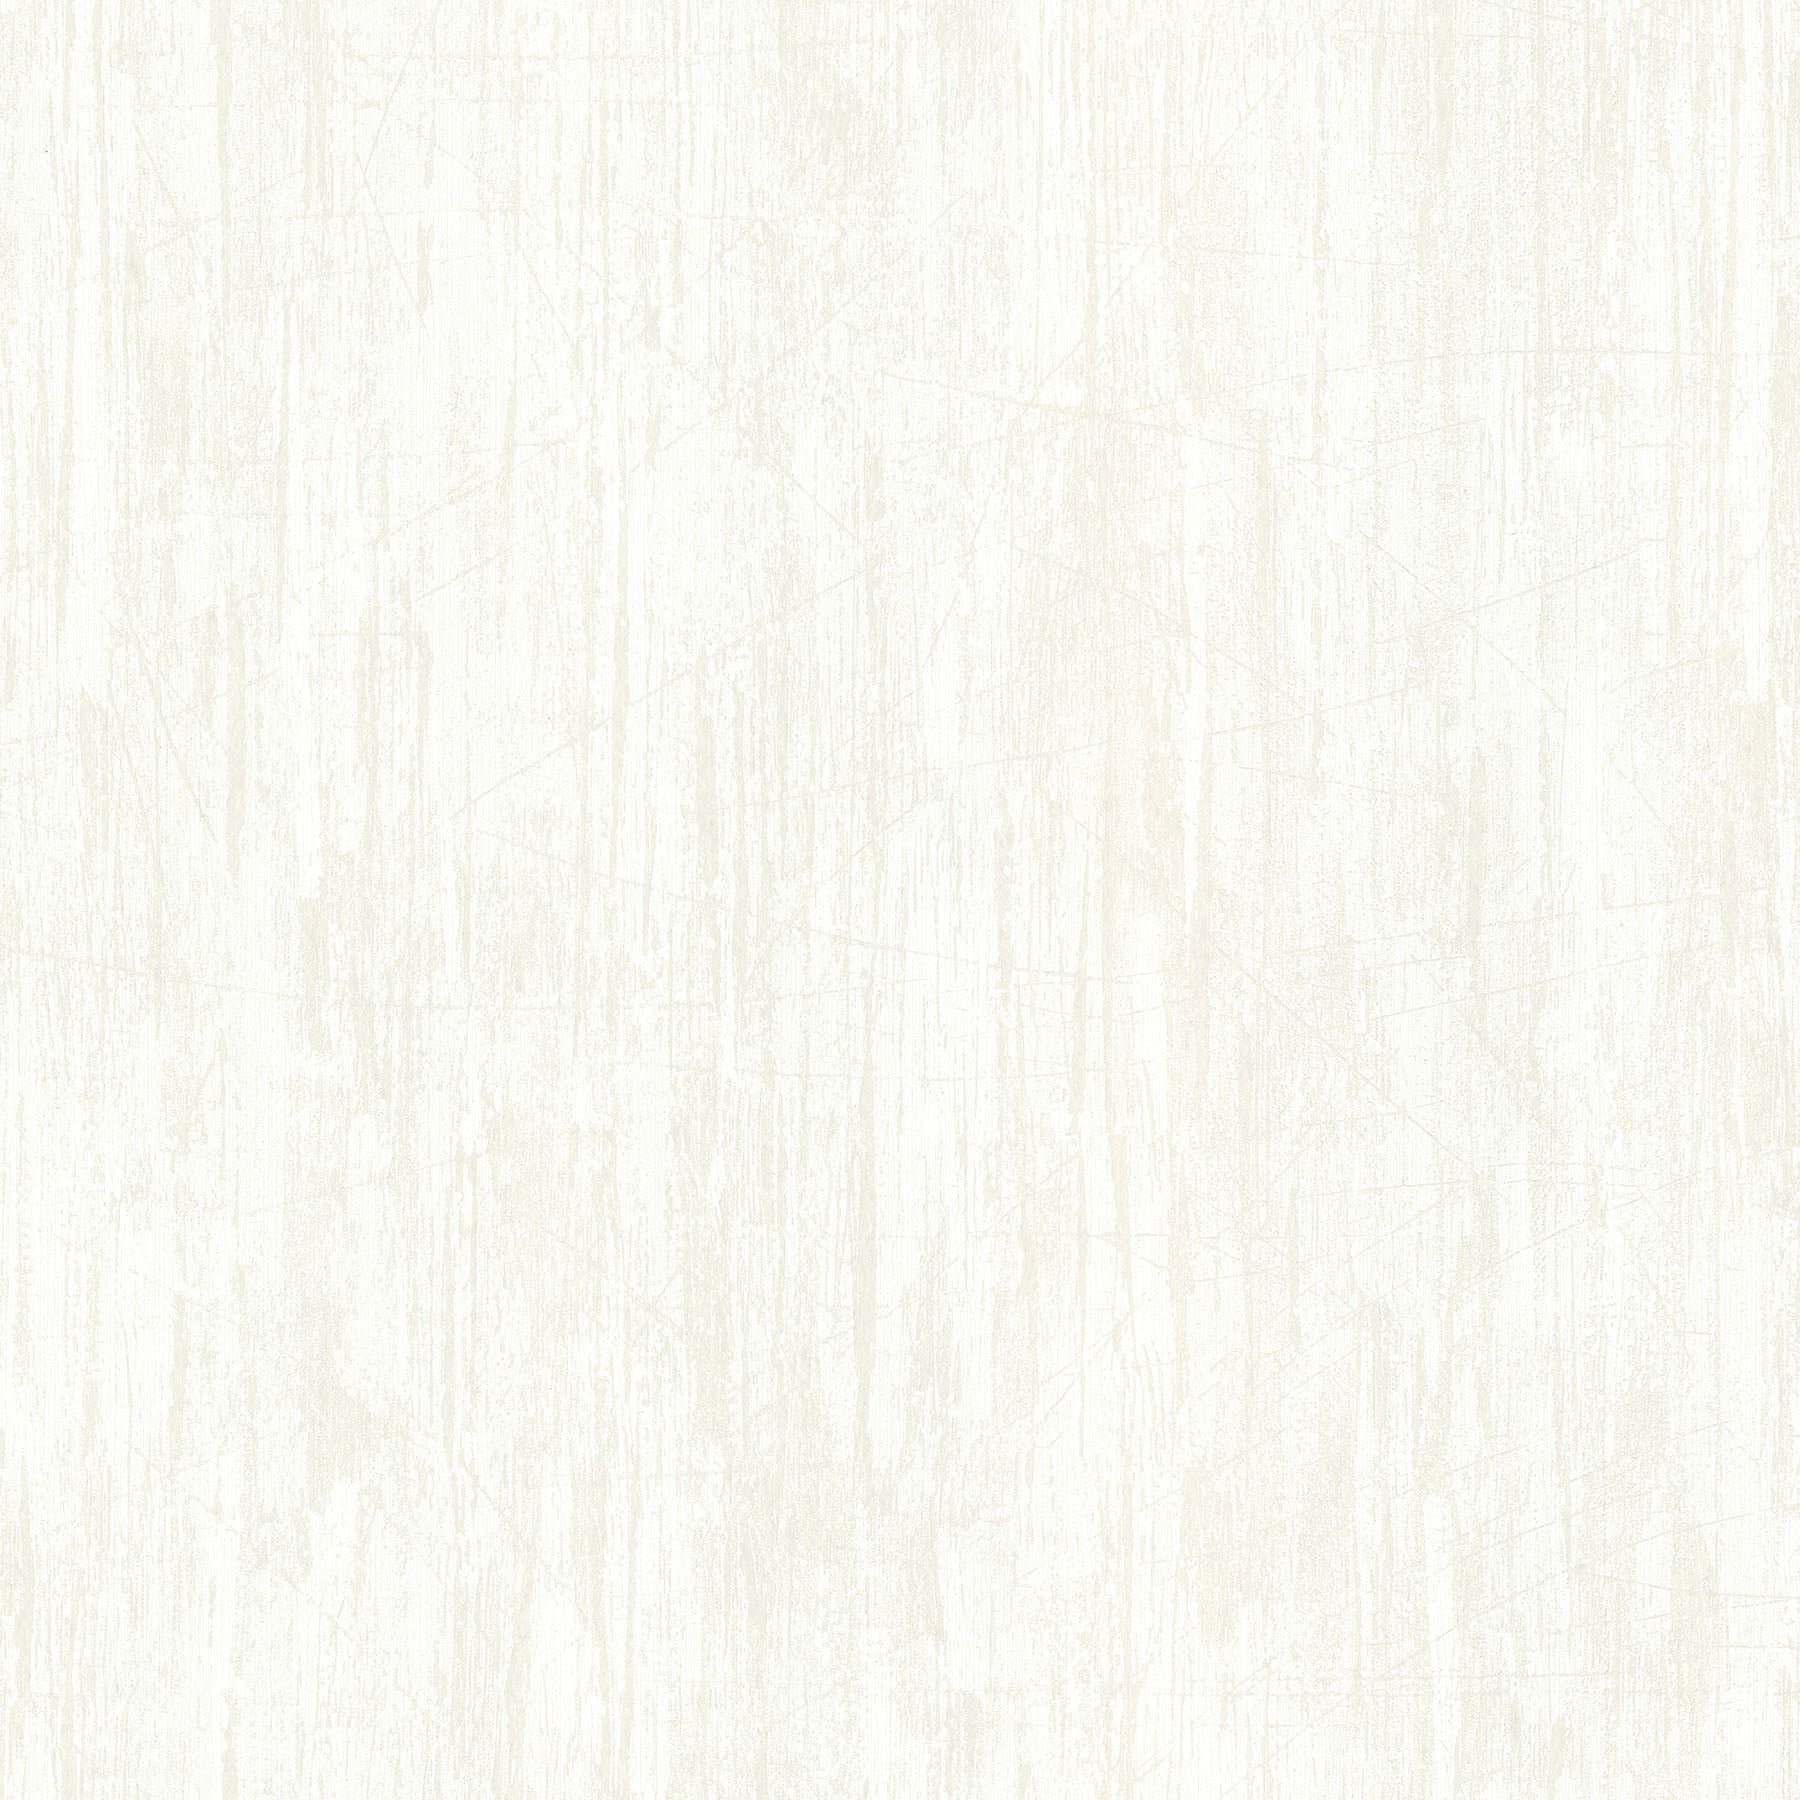 Shop 2774-480900 Stones & Woods Whites & Off-Whites Wood Paneling Wallpaper by Advantage